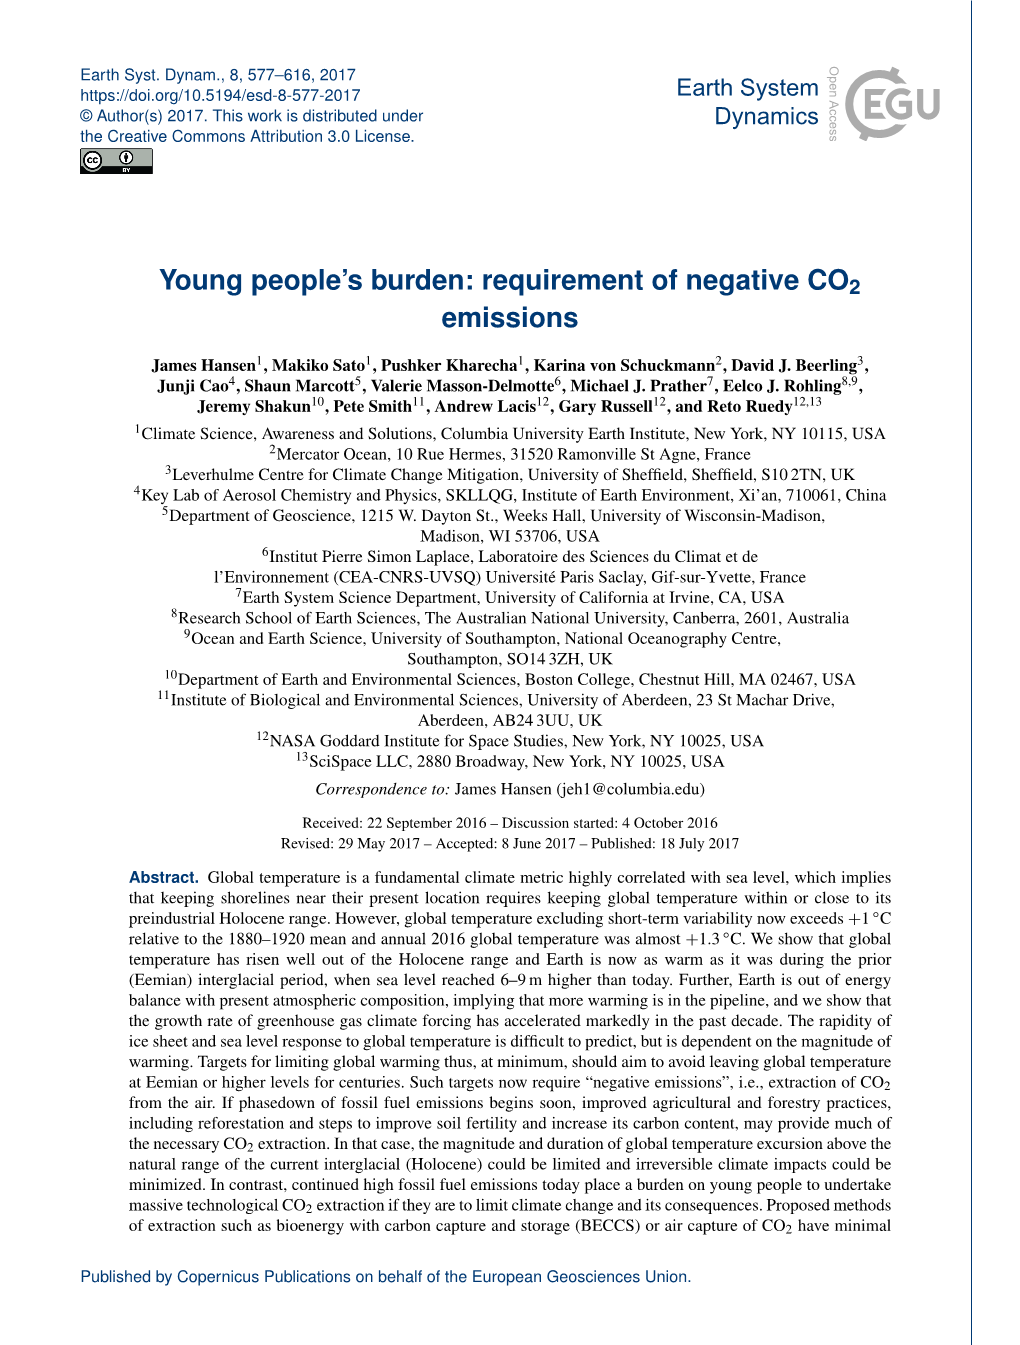 Young People's Burden: Requirement of Negative CO2 Emissions